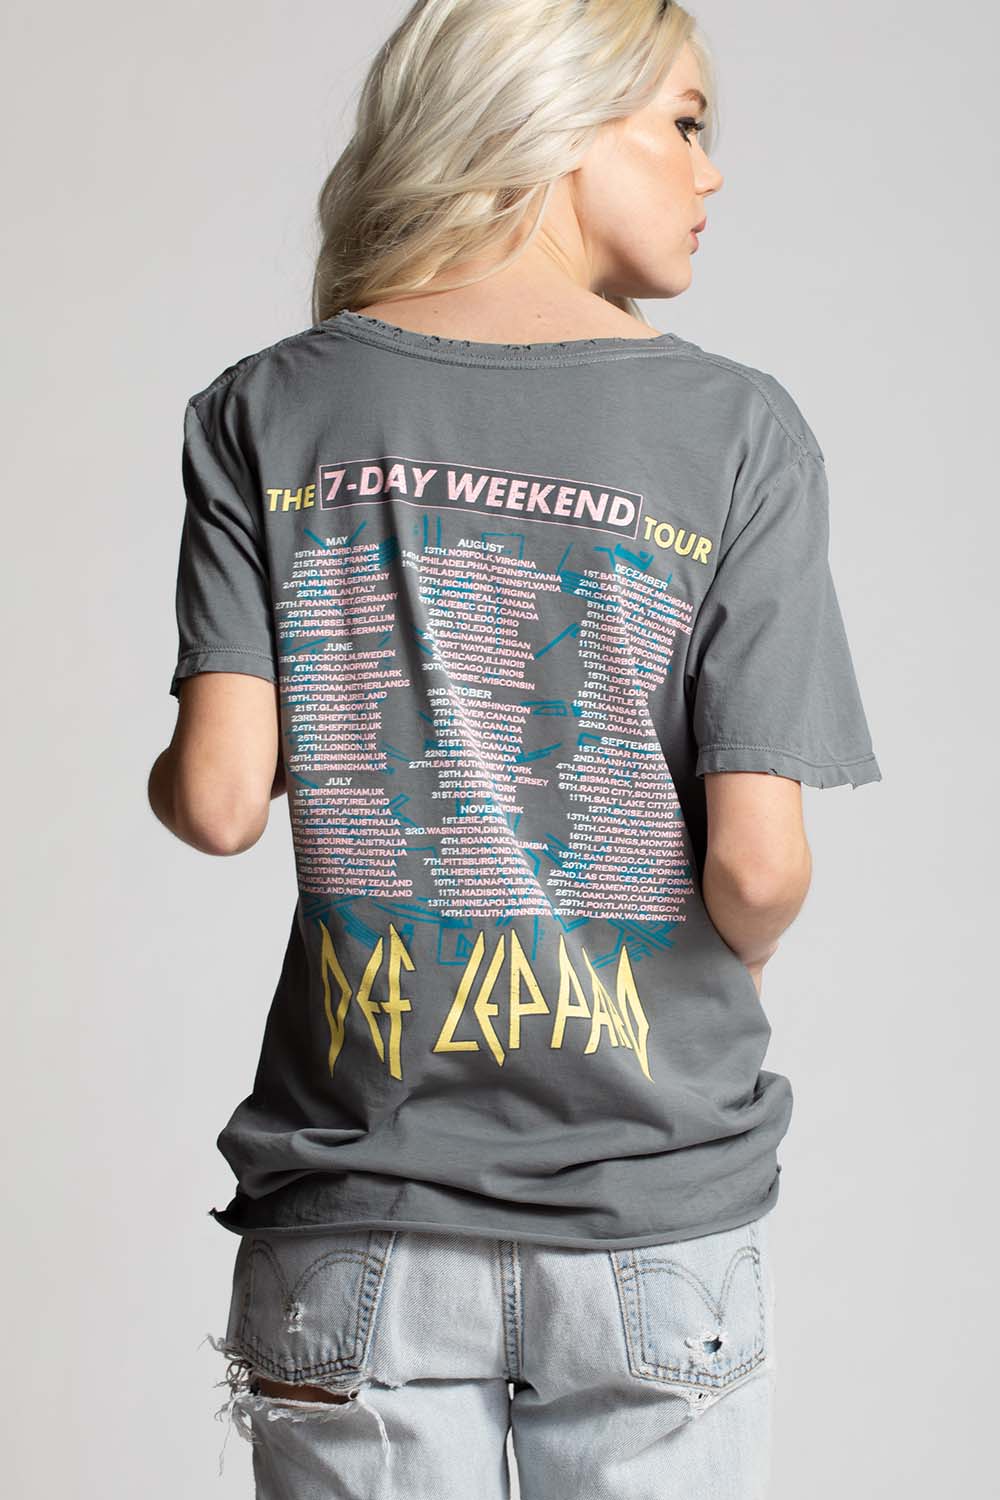 Recycled Karma Def Leppard The 7-Day Weekend Tour Tee